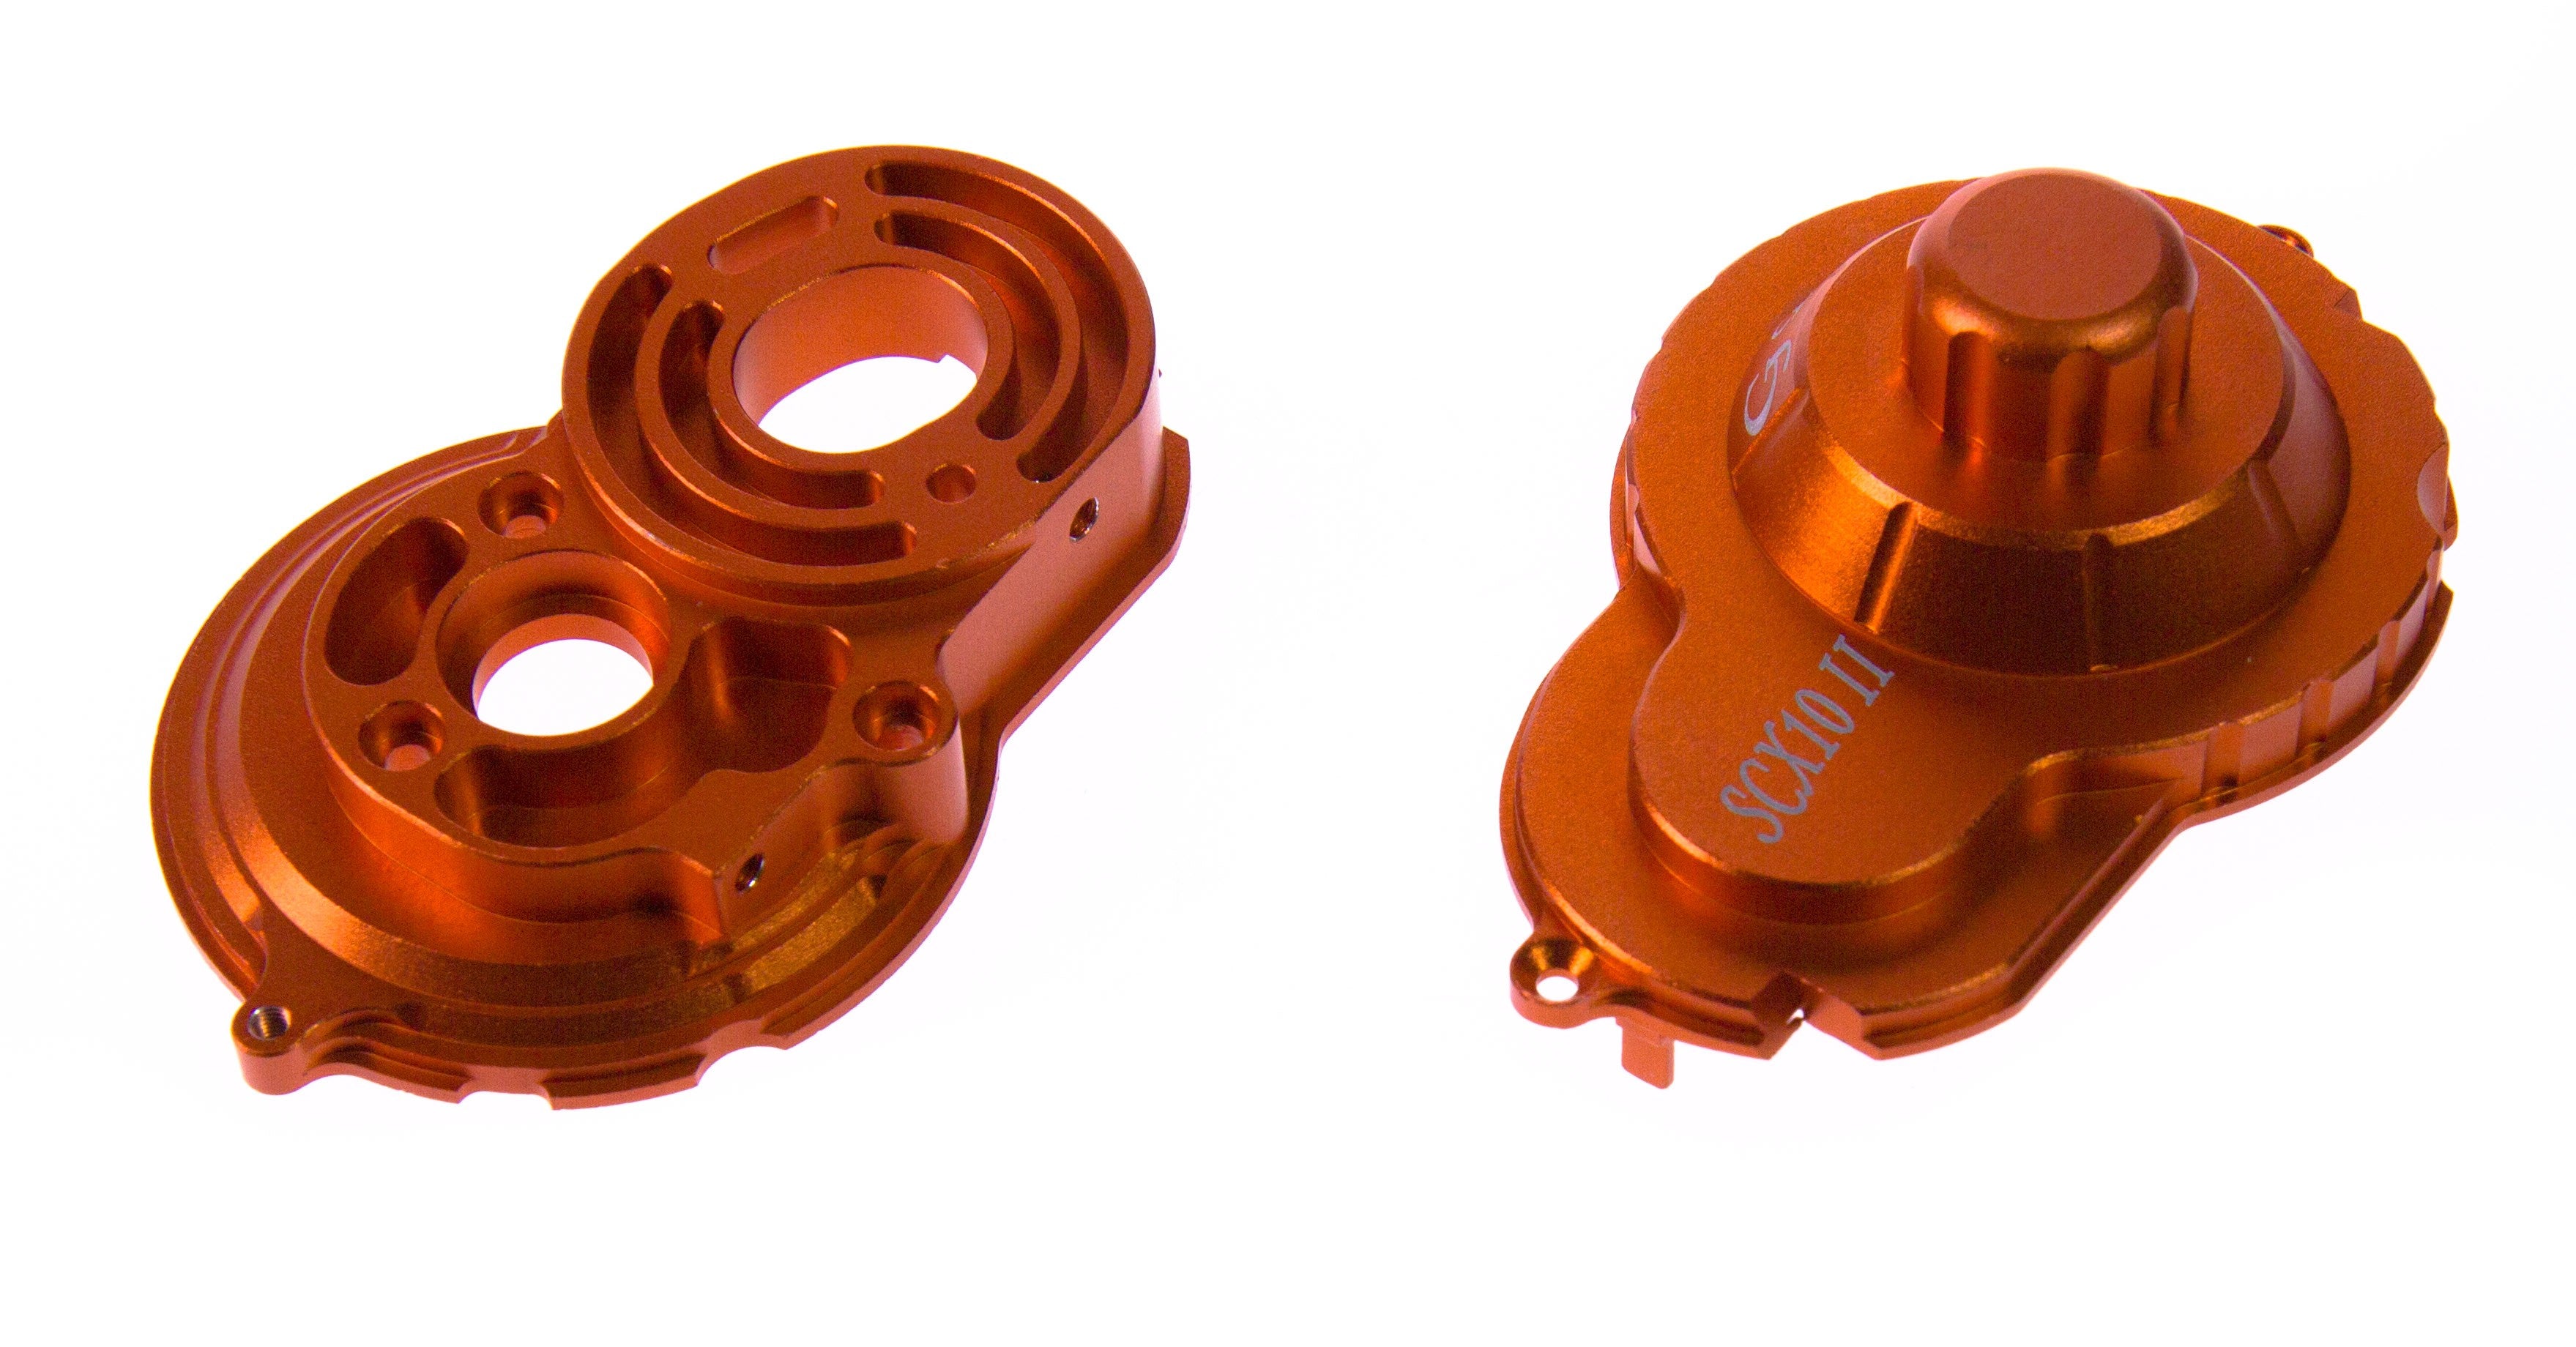 GPM Support moteur + protection couronne alu orange (x2) SCX2038GC-OR